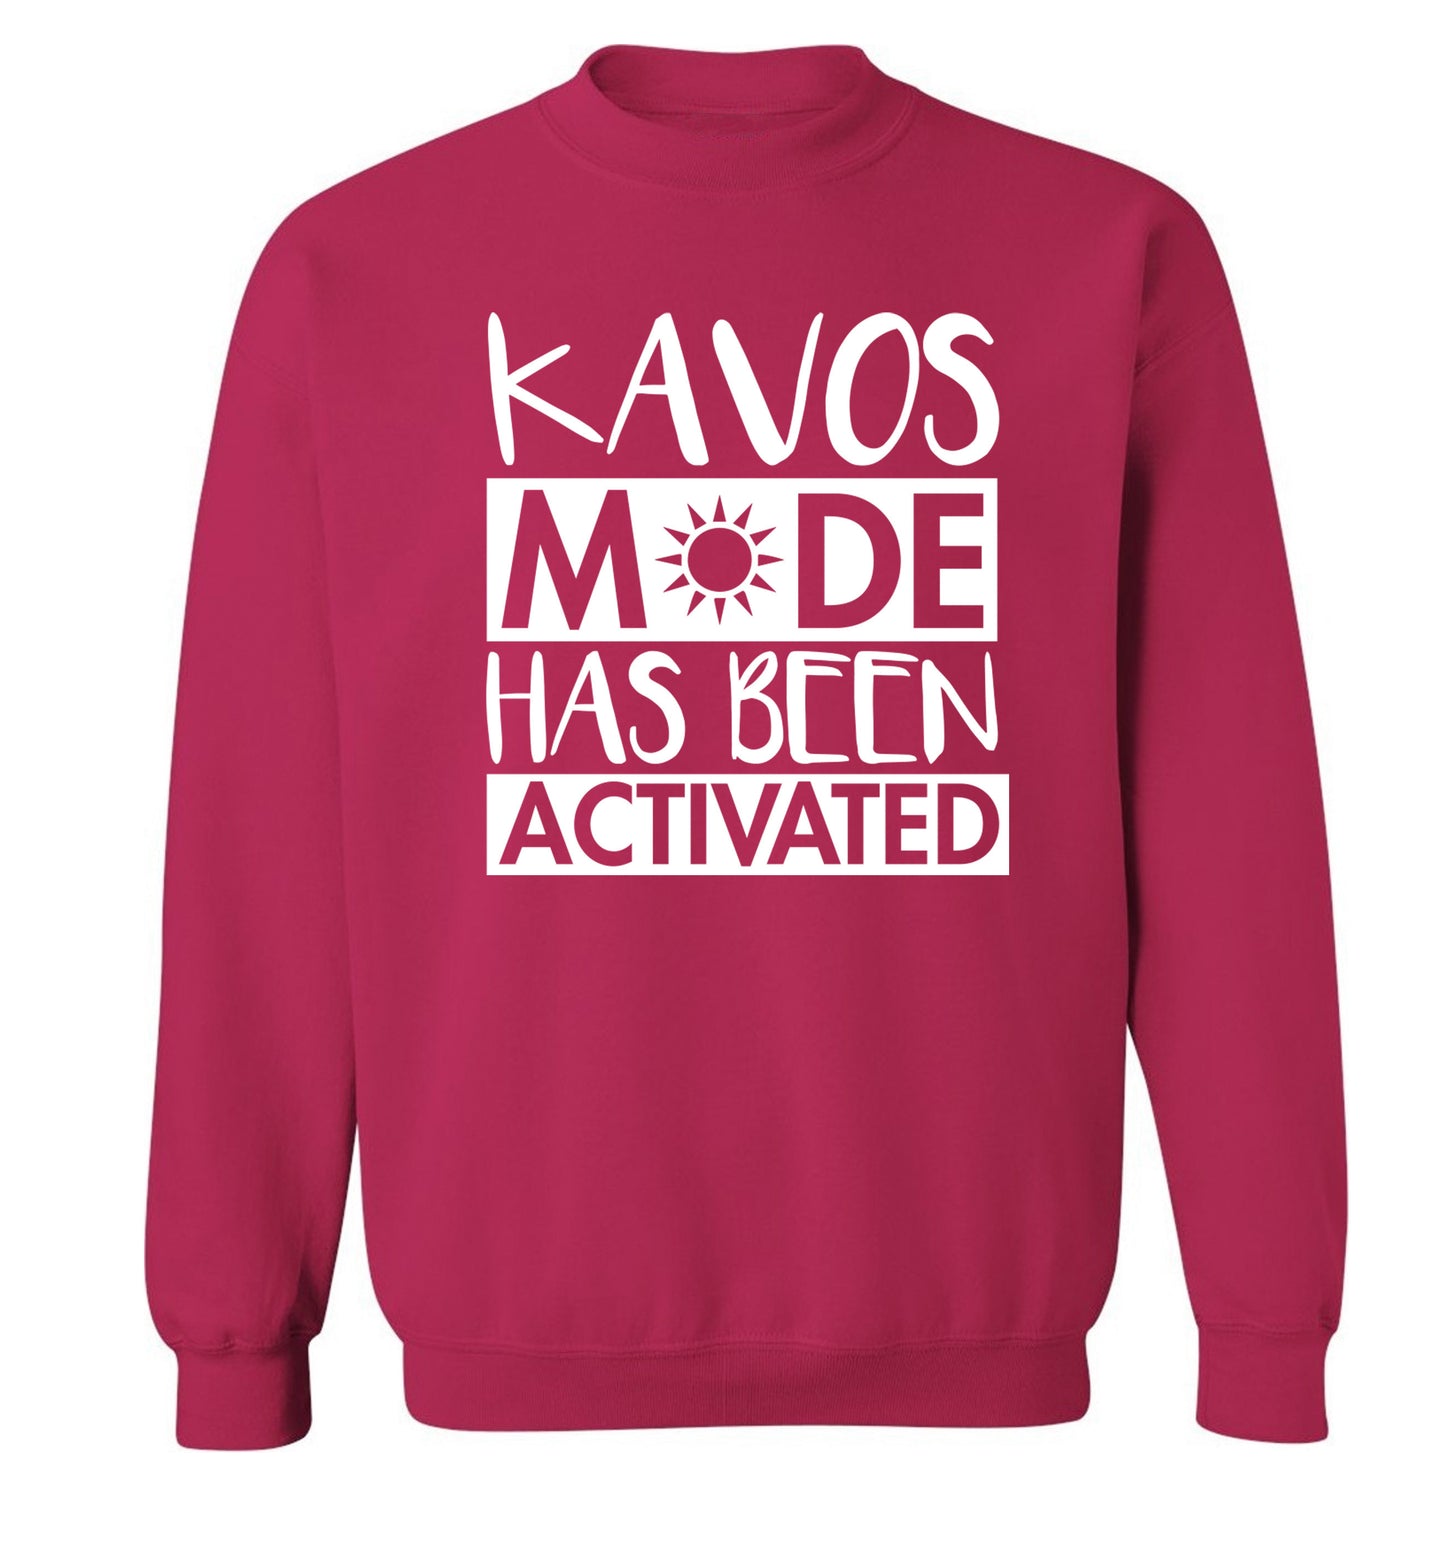 Kavos mode has been activated Adult's unisex pink Sweater 2XL